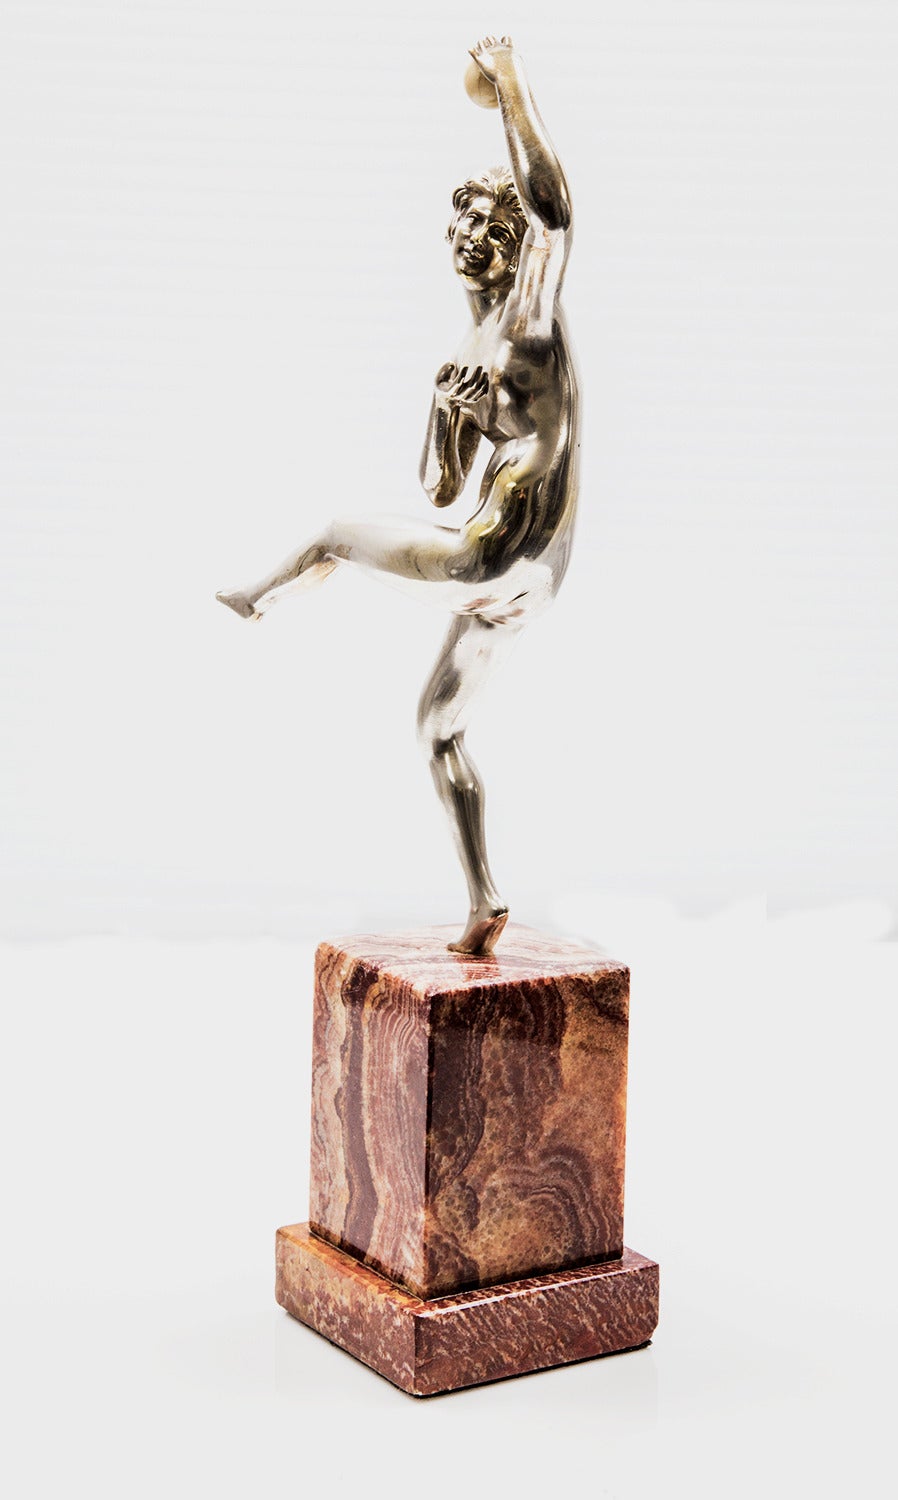 Rare silvered bronze figure depicting a nude dancer, poised on one leg with a ball in hand on marble base; Signature: Guiraud Rivière, engraved to marble; Approx. 13” high, including 4” base. By Maurice Guiraud Riviere, Toulouse (1881-1947) an